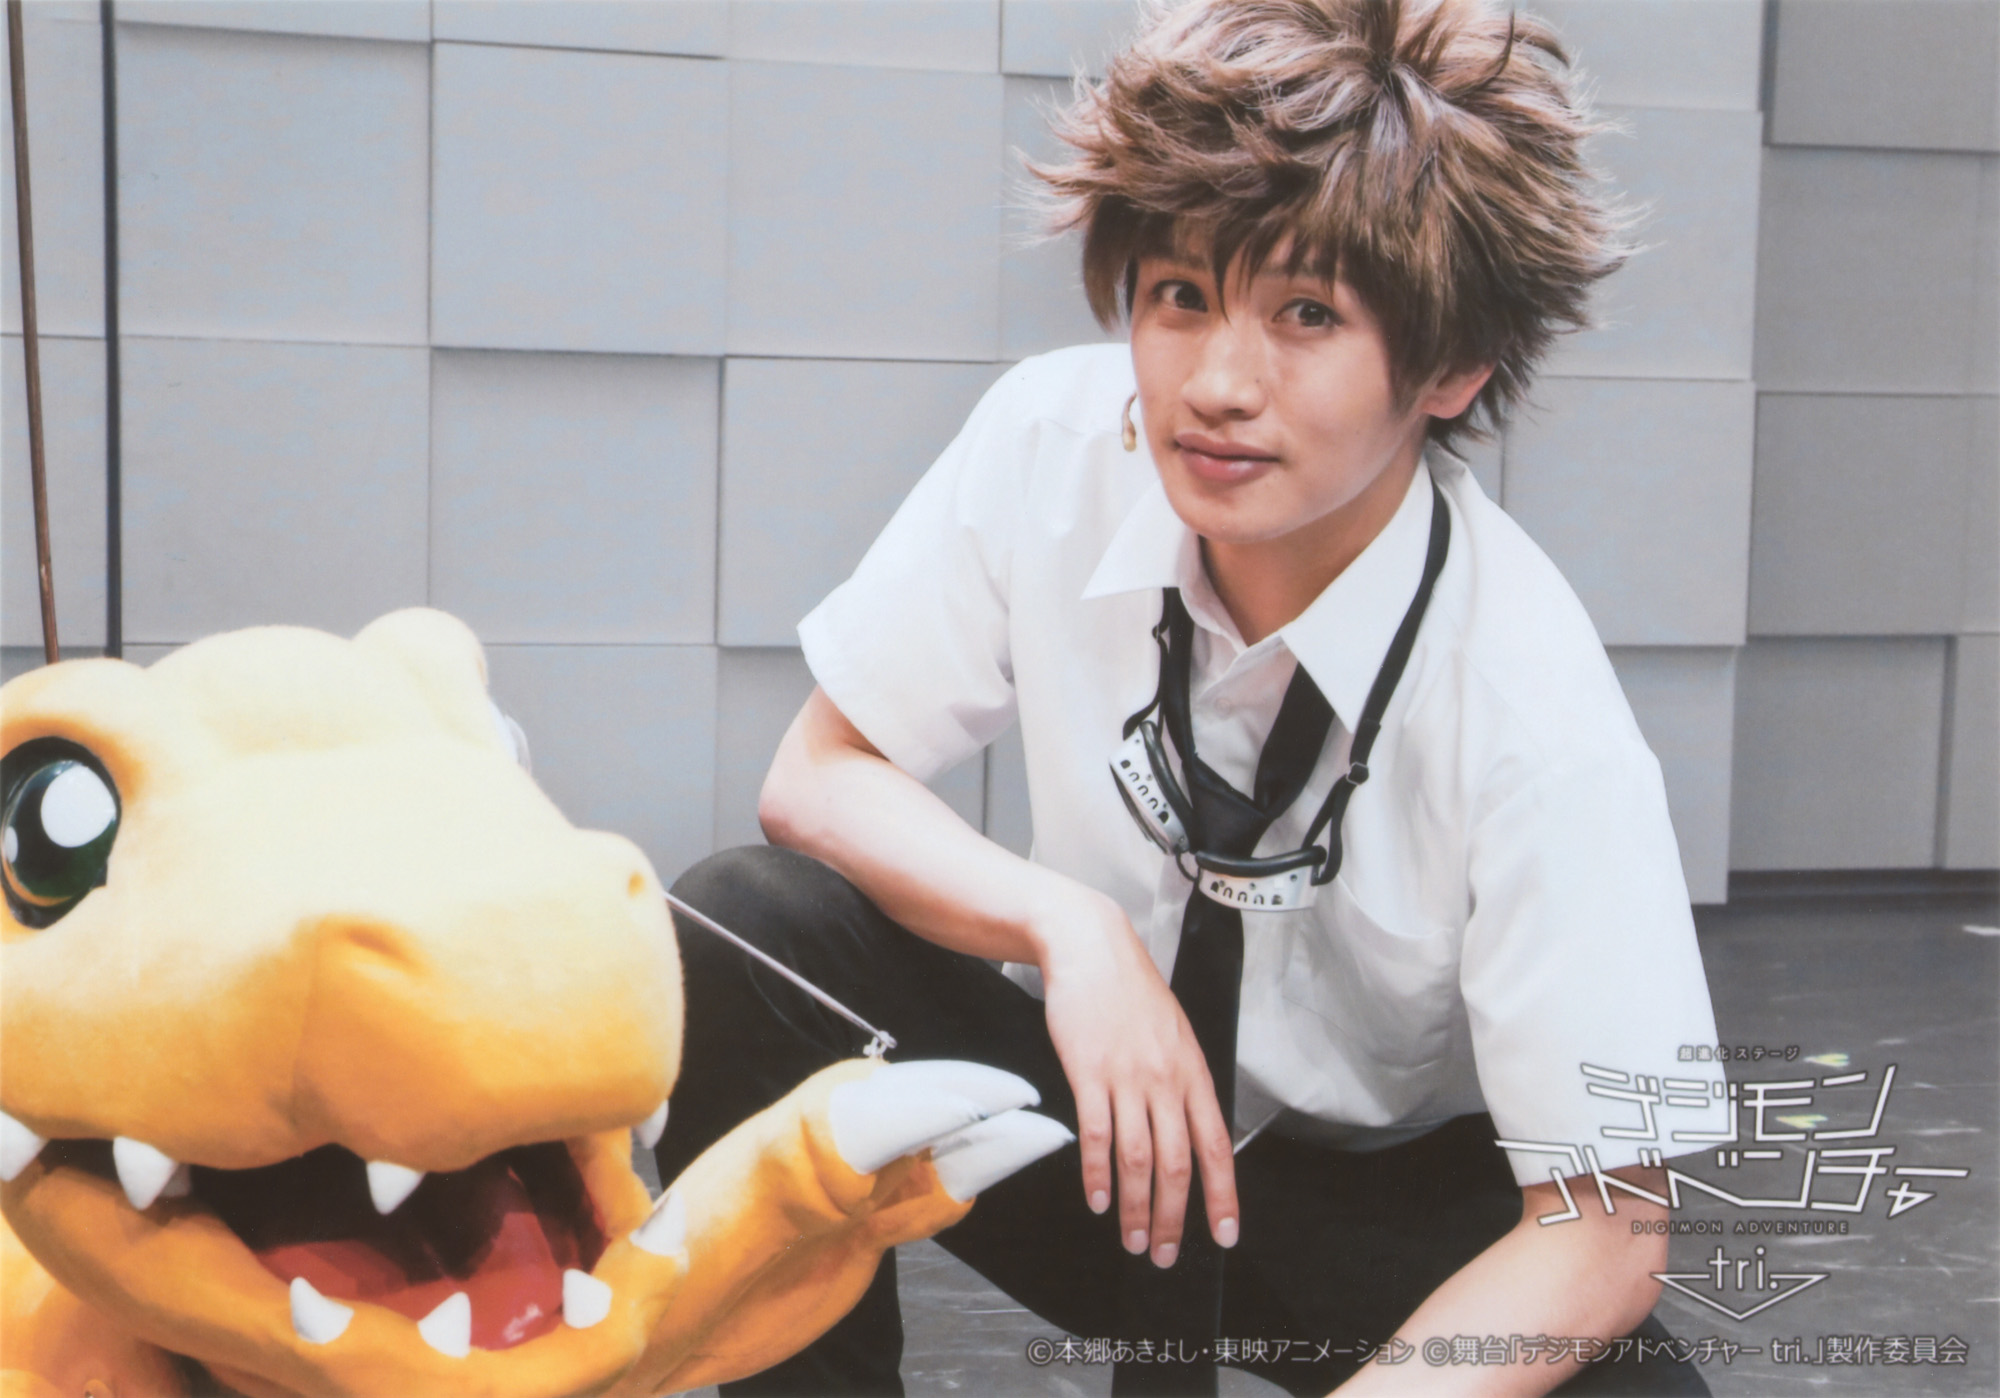 First in-costume photo from Digimon live-action stage production released